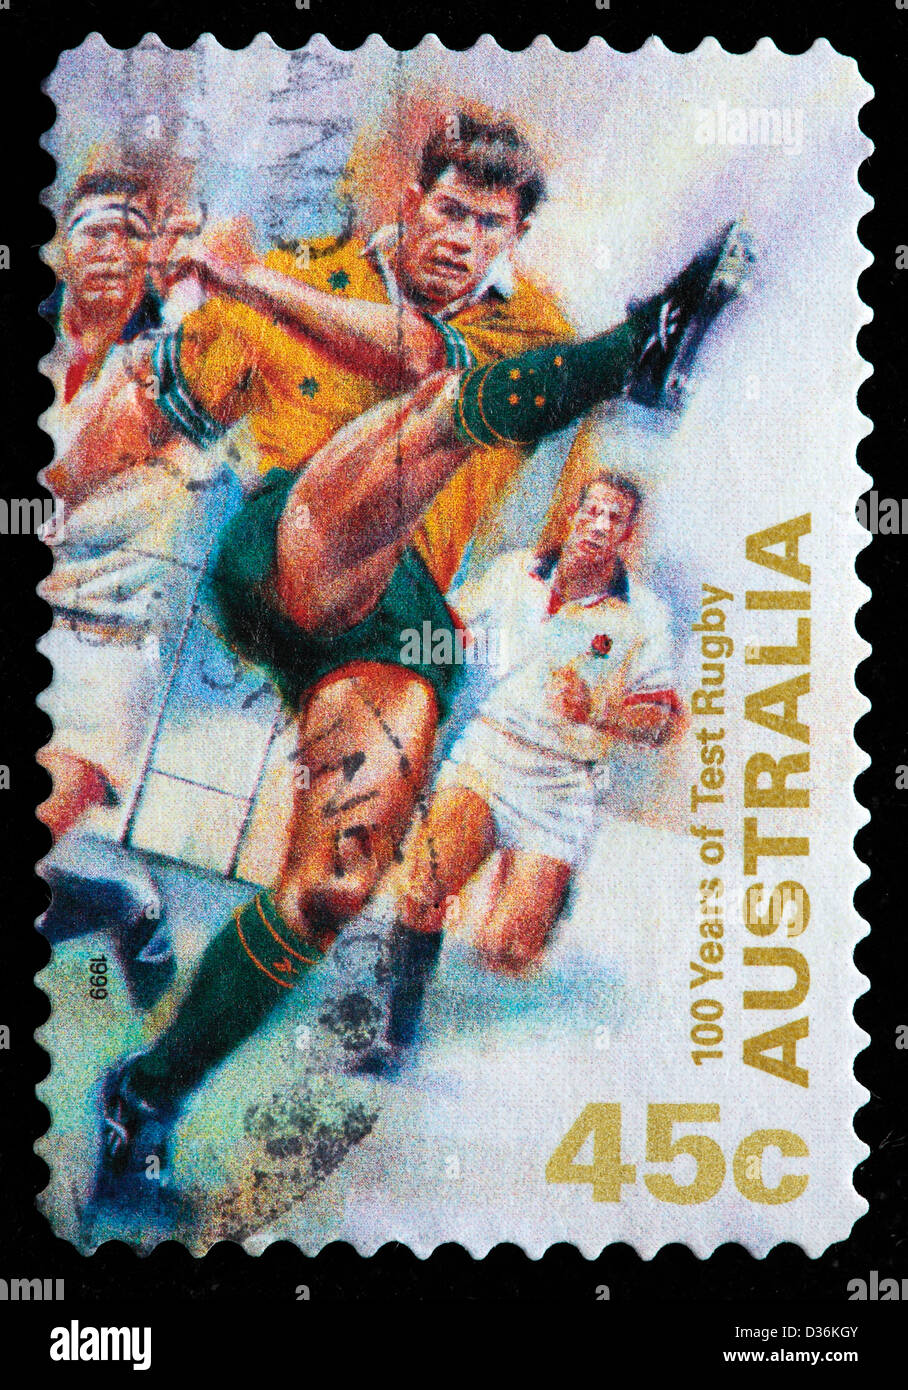 100 Years of Test Rugby, postage stamp, Australia, 1999 Stock Photo